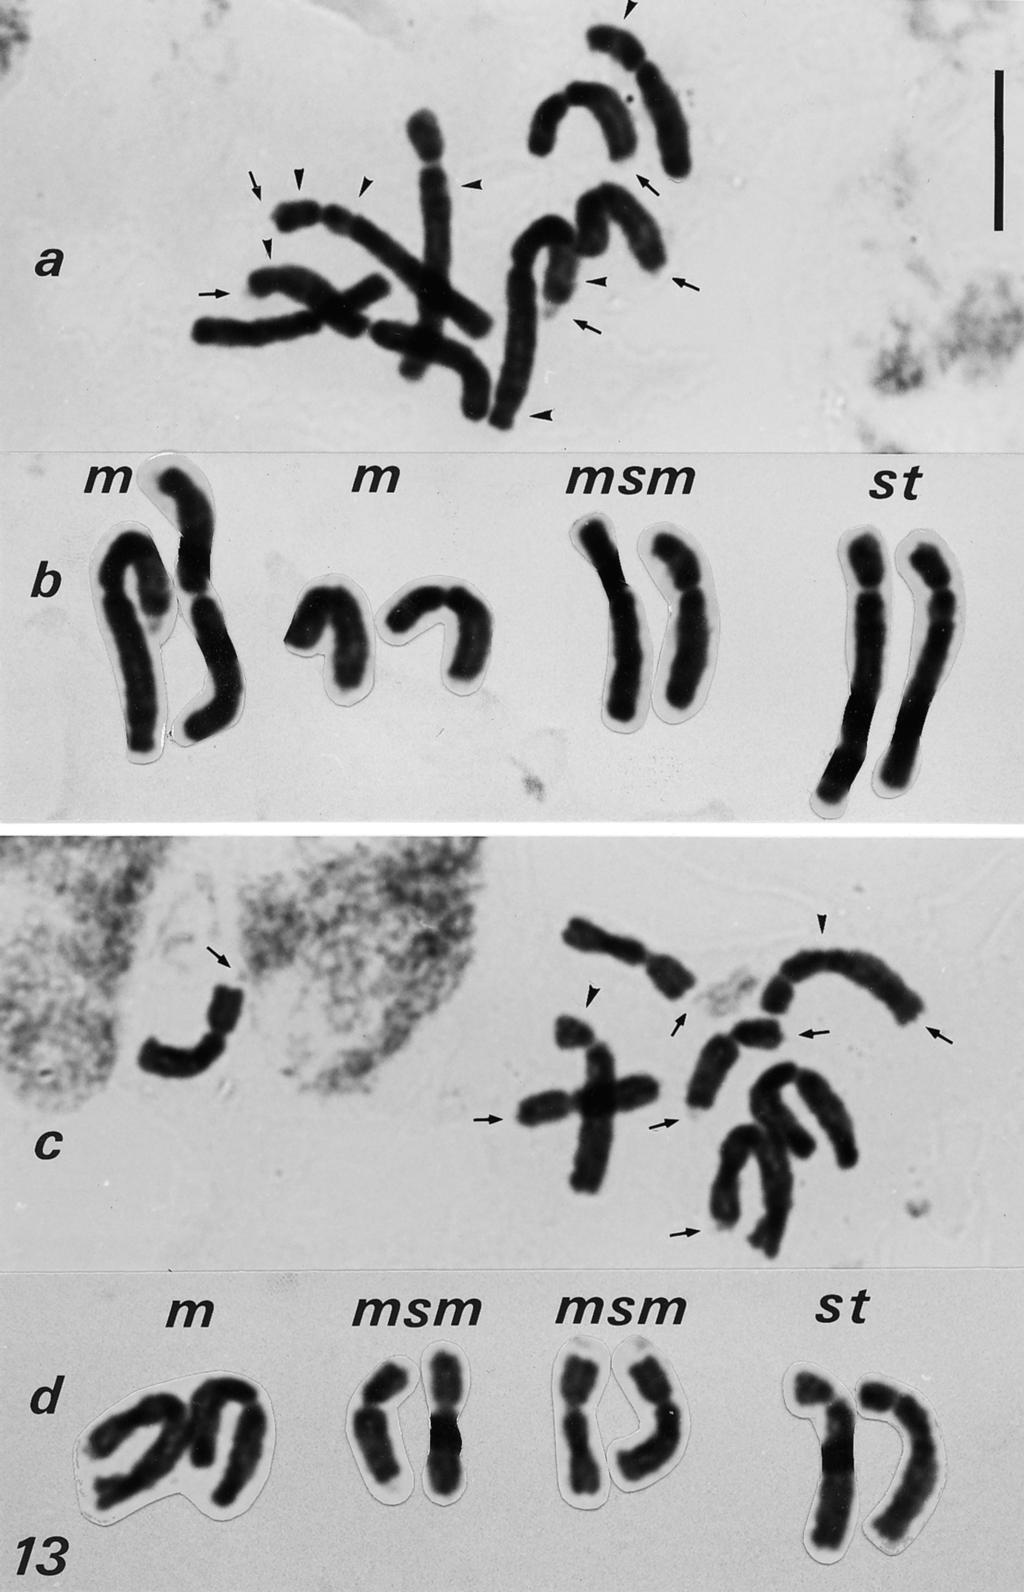 Willdenowia 27 1997 131 Fig. 13. Mitotic metaphase plates (a,c) and karyograms (b,d) of Bellevalia ciliata, 2n = 8; 13a-b: material from Mt Kitheron (Const.